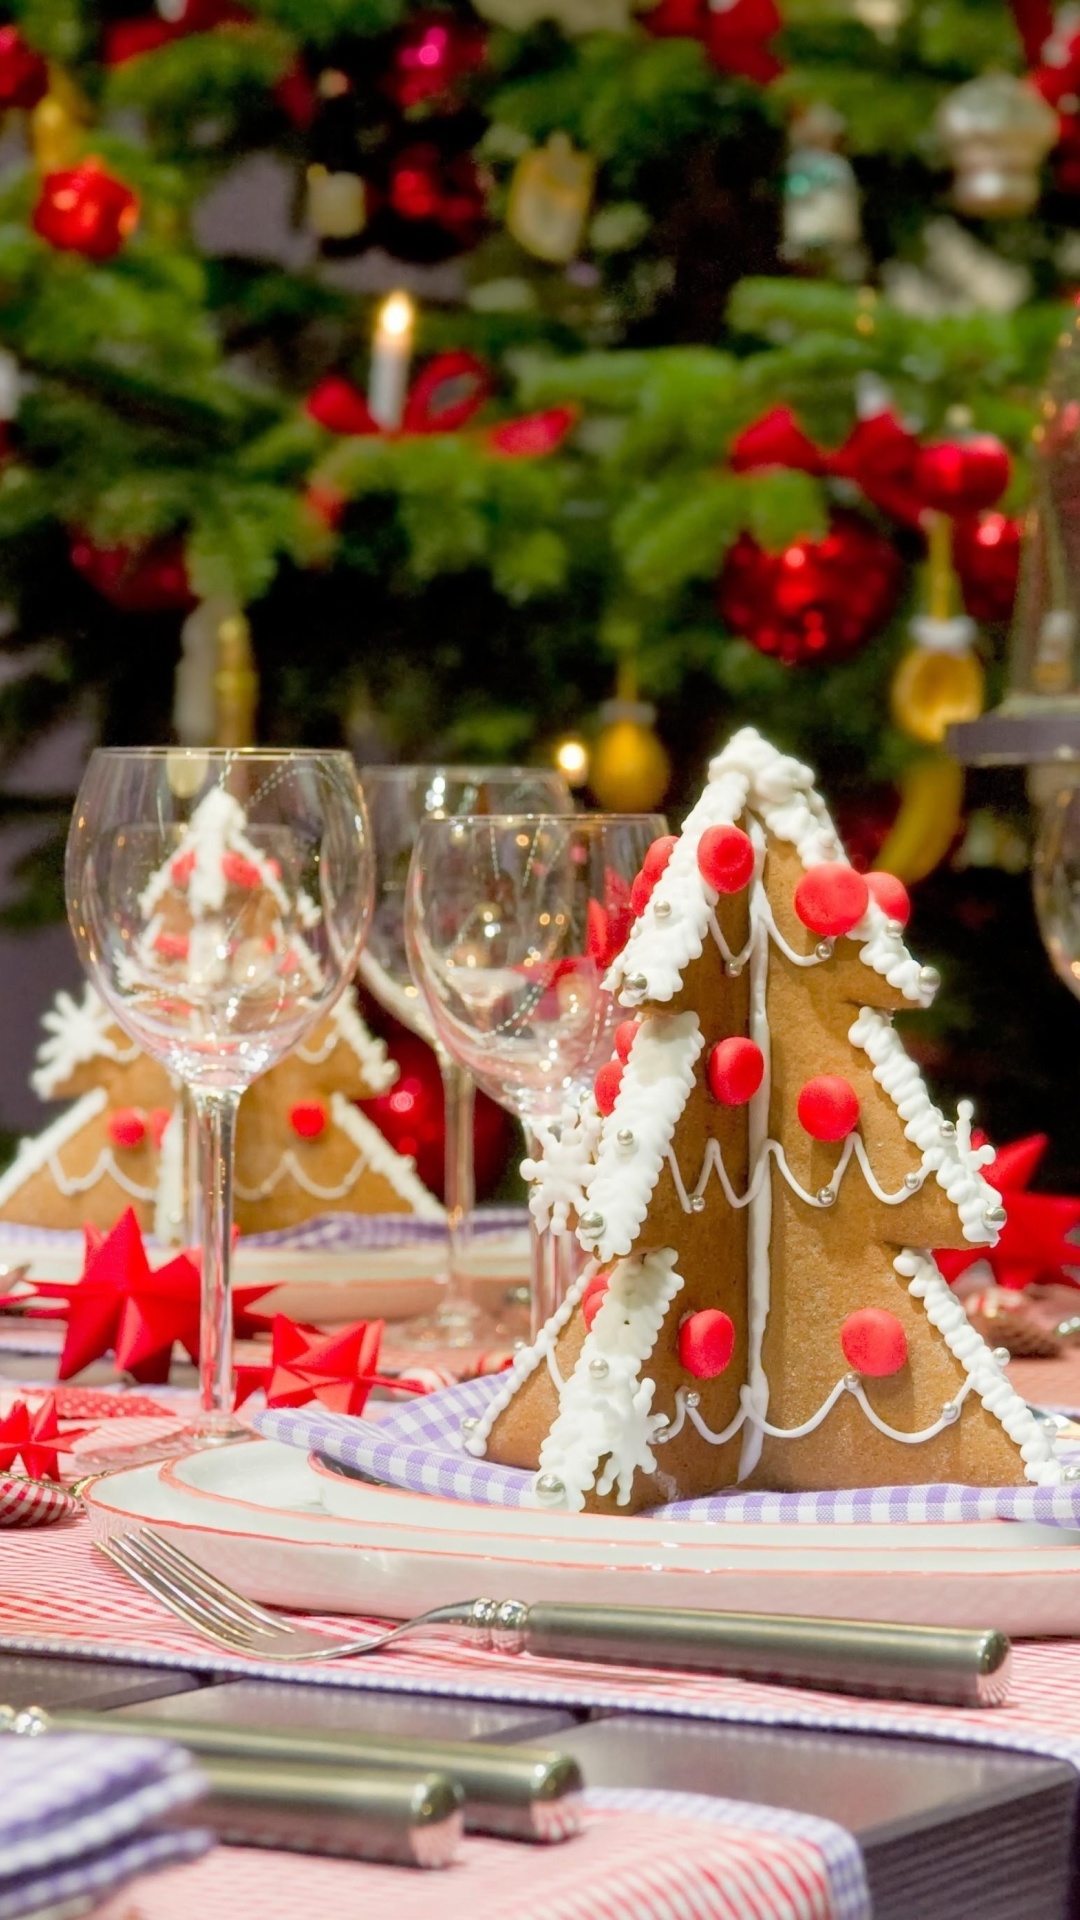 Christmas Table Decorations Ideas wallpaper 1080x1920